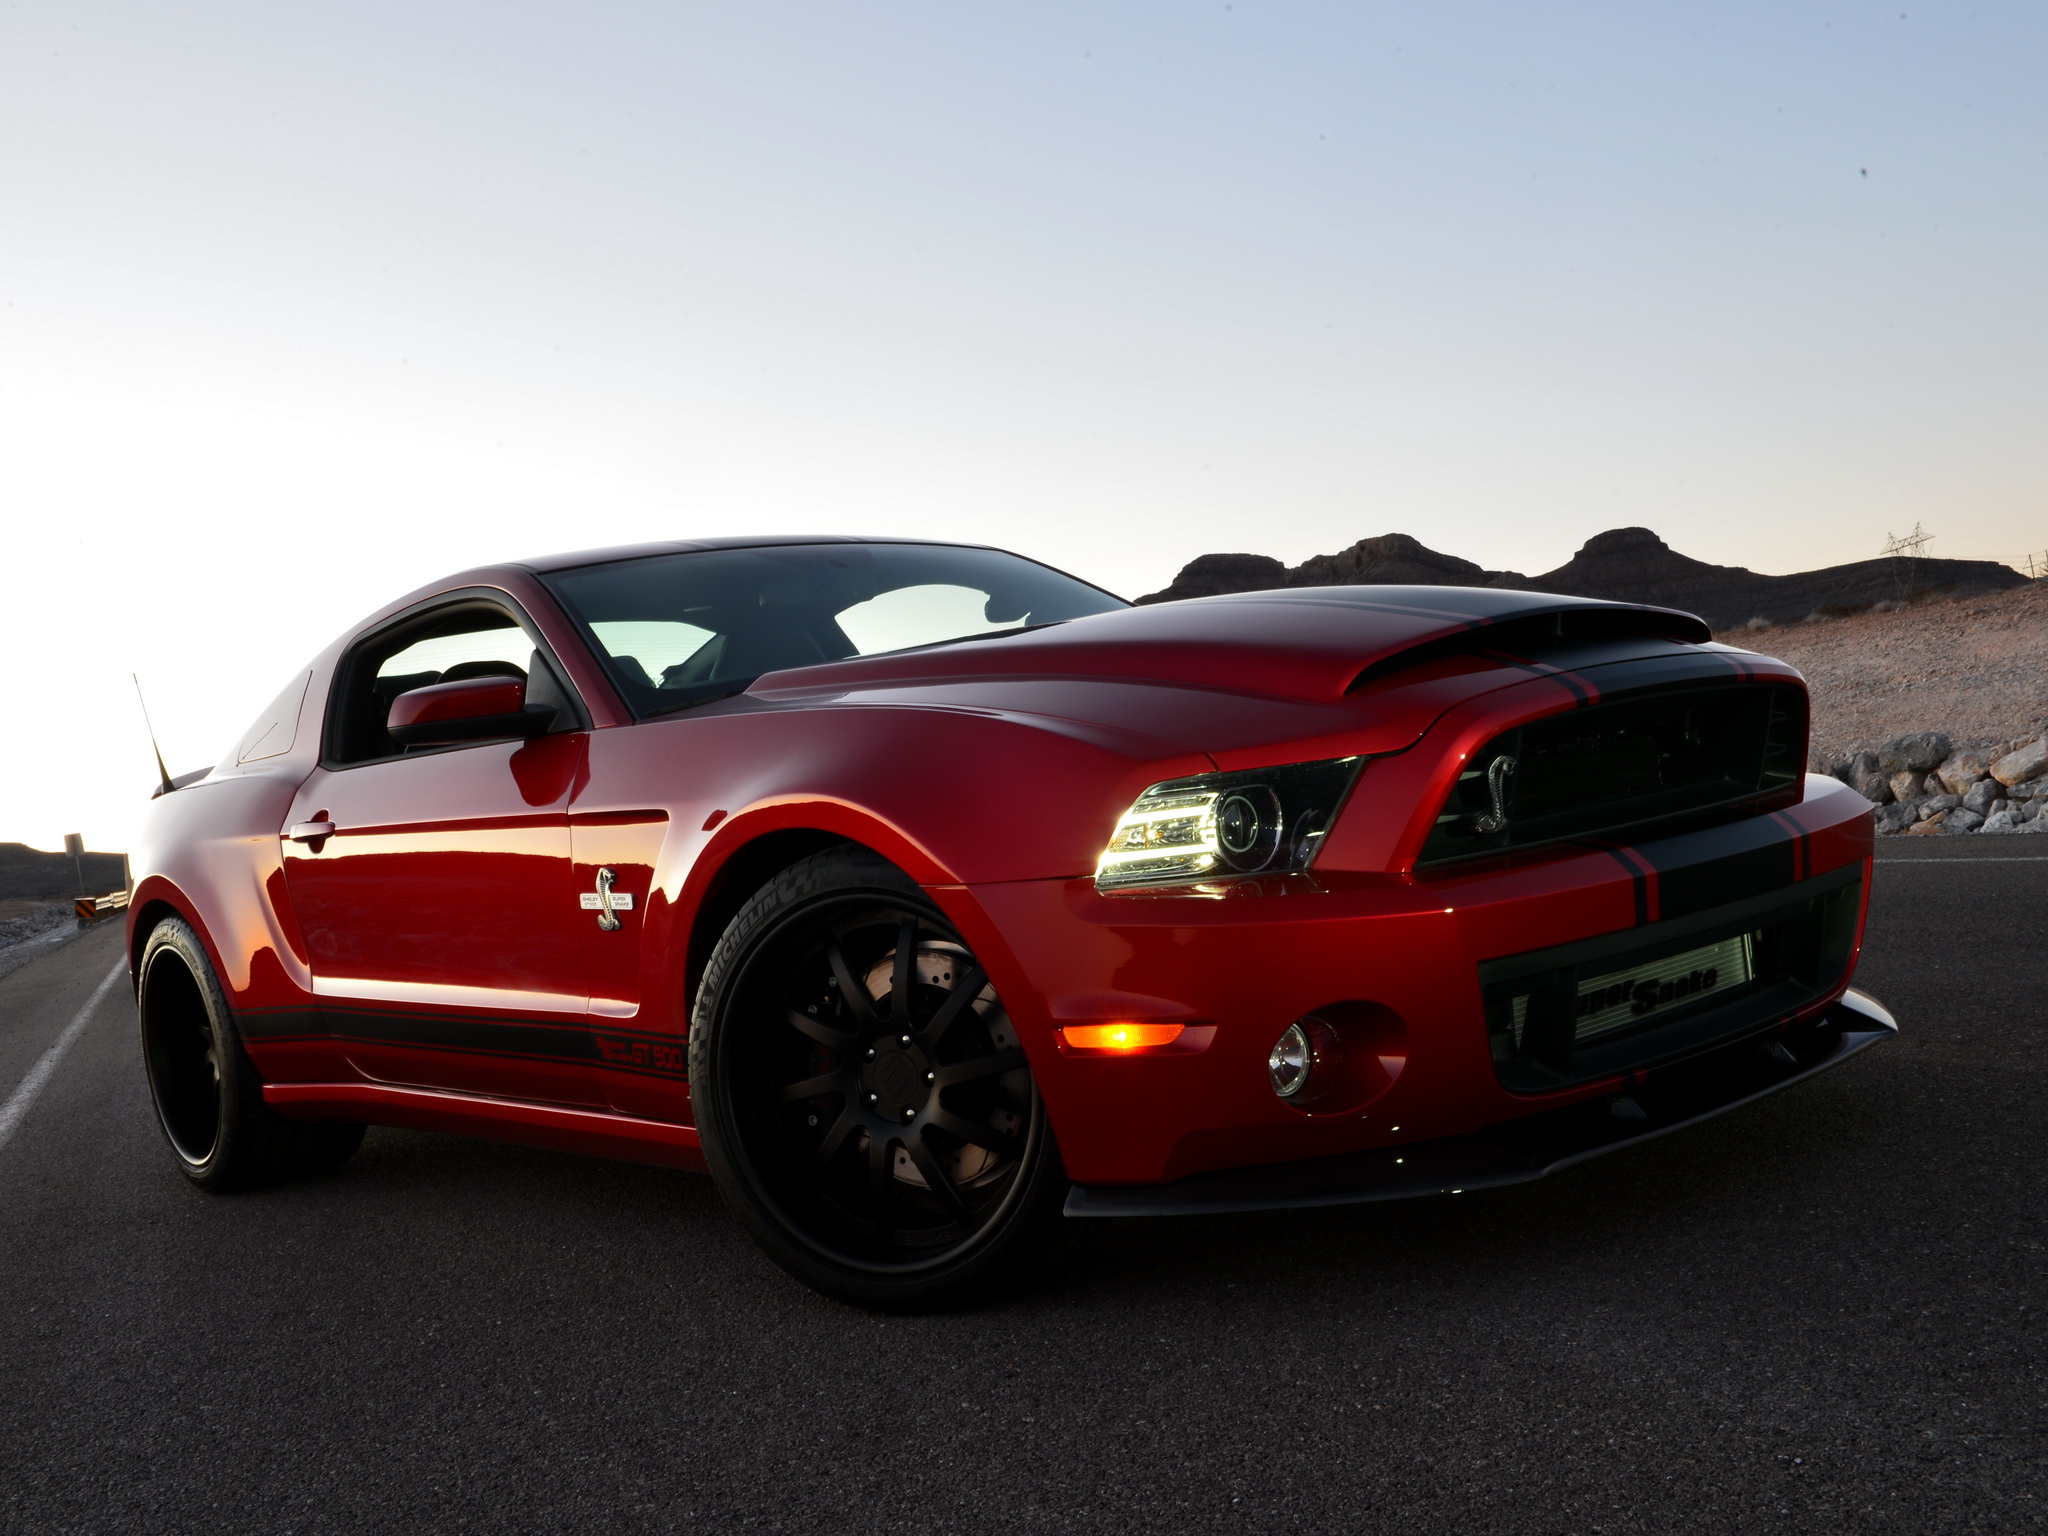 Ford Shelby GT500 Super Snake Wide Body Rouge Phare automobile Devant voiture, automobile Voitures